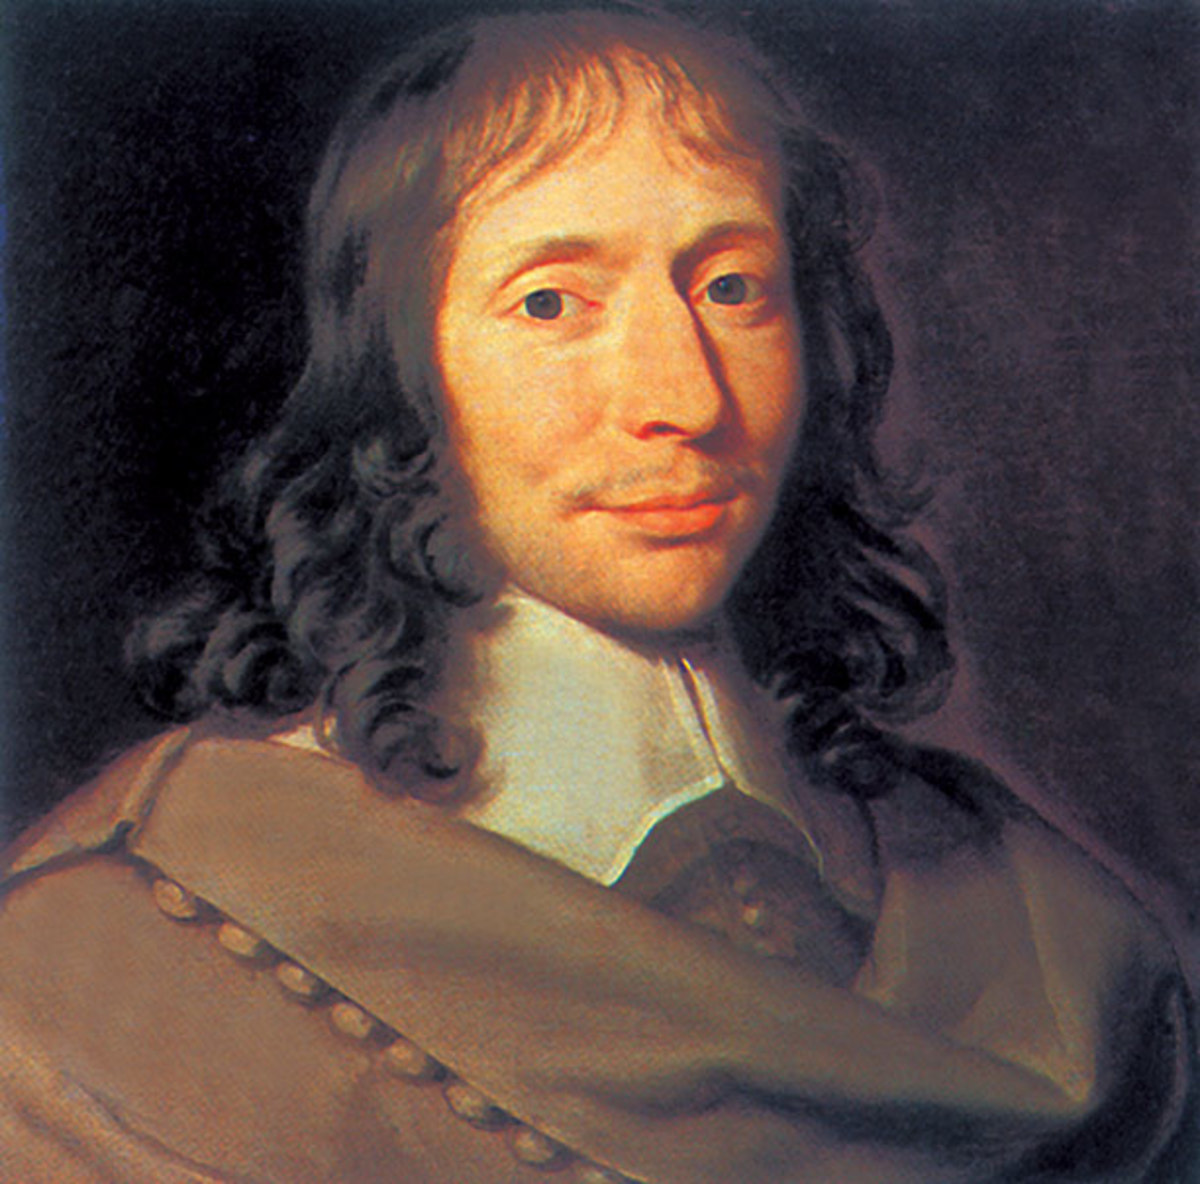 French intellectual #BlaisePascal died #onthisday way back in 1662. #mathematician #physicist #inventor #writer #trivia #Catholic #theologian #childprodigy #PascalsWager #PascalsTriangle #PascalsLaw #PascalsTheorem #scientificmethod #Pascal #calculator #math #science